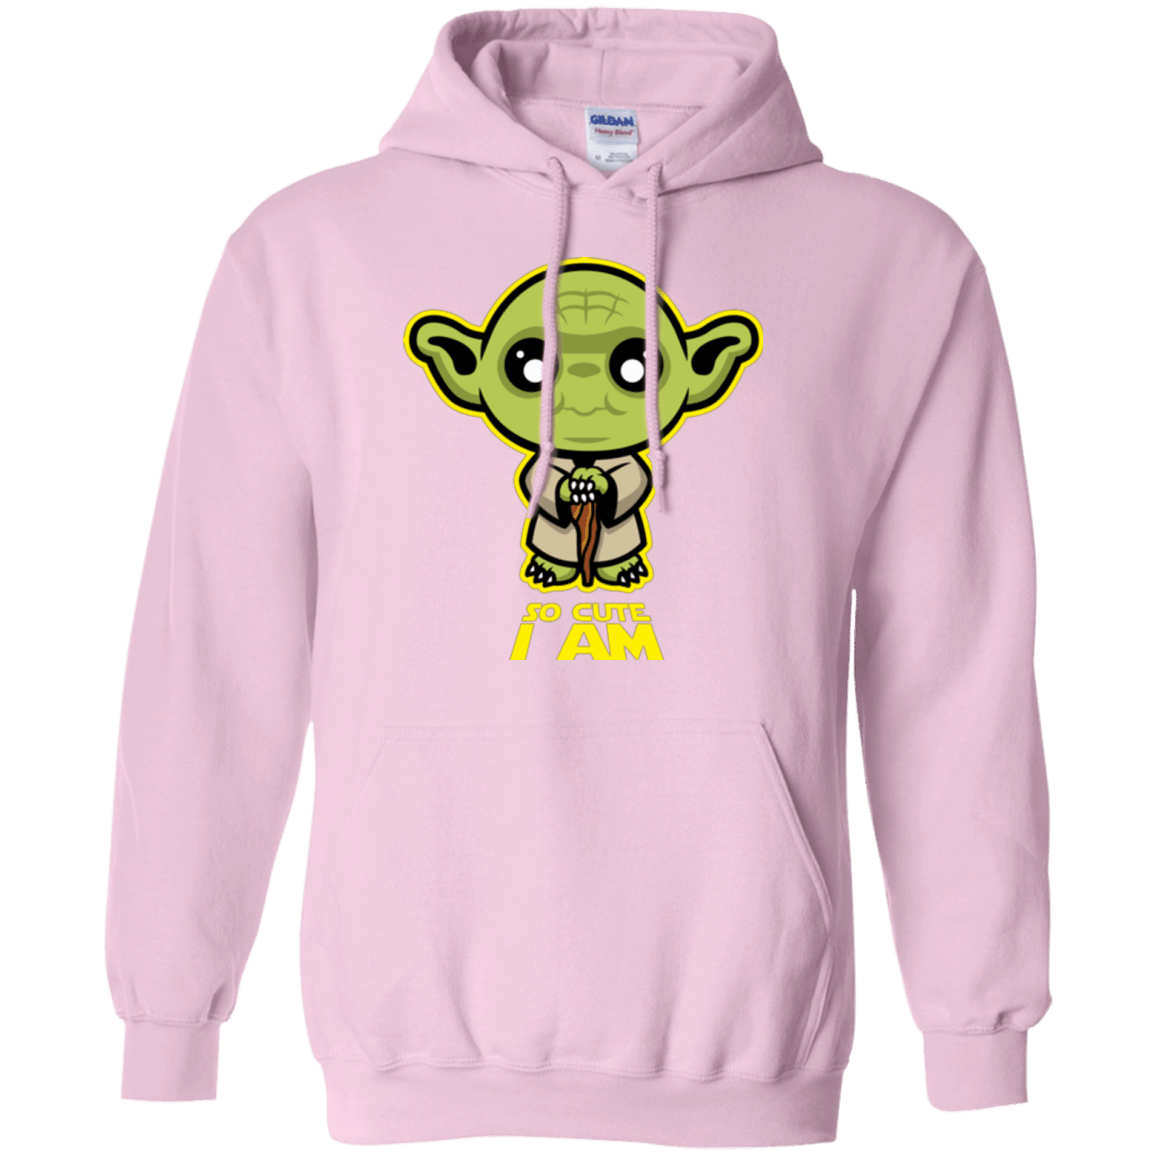 Sweatshirts Light Pink / Small So Cute I Am Pullover Hoodie